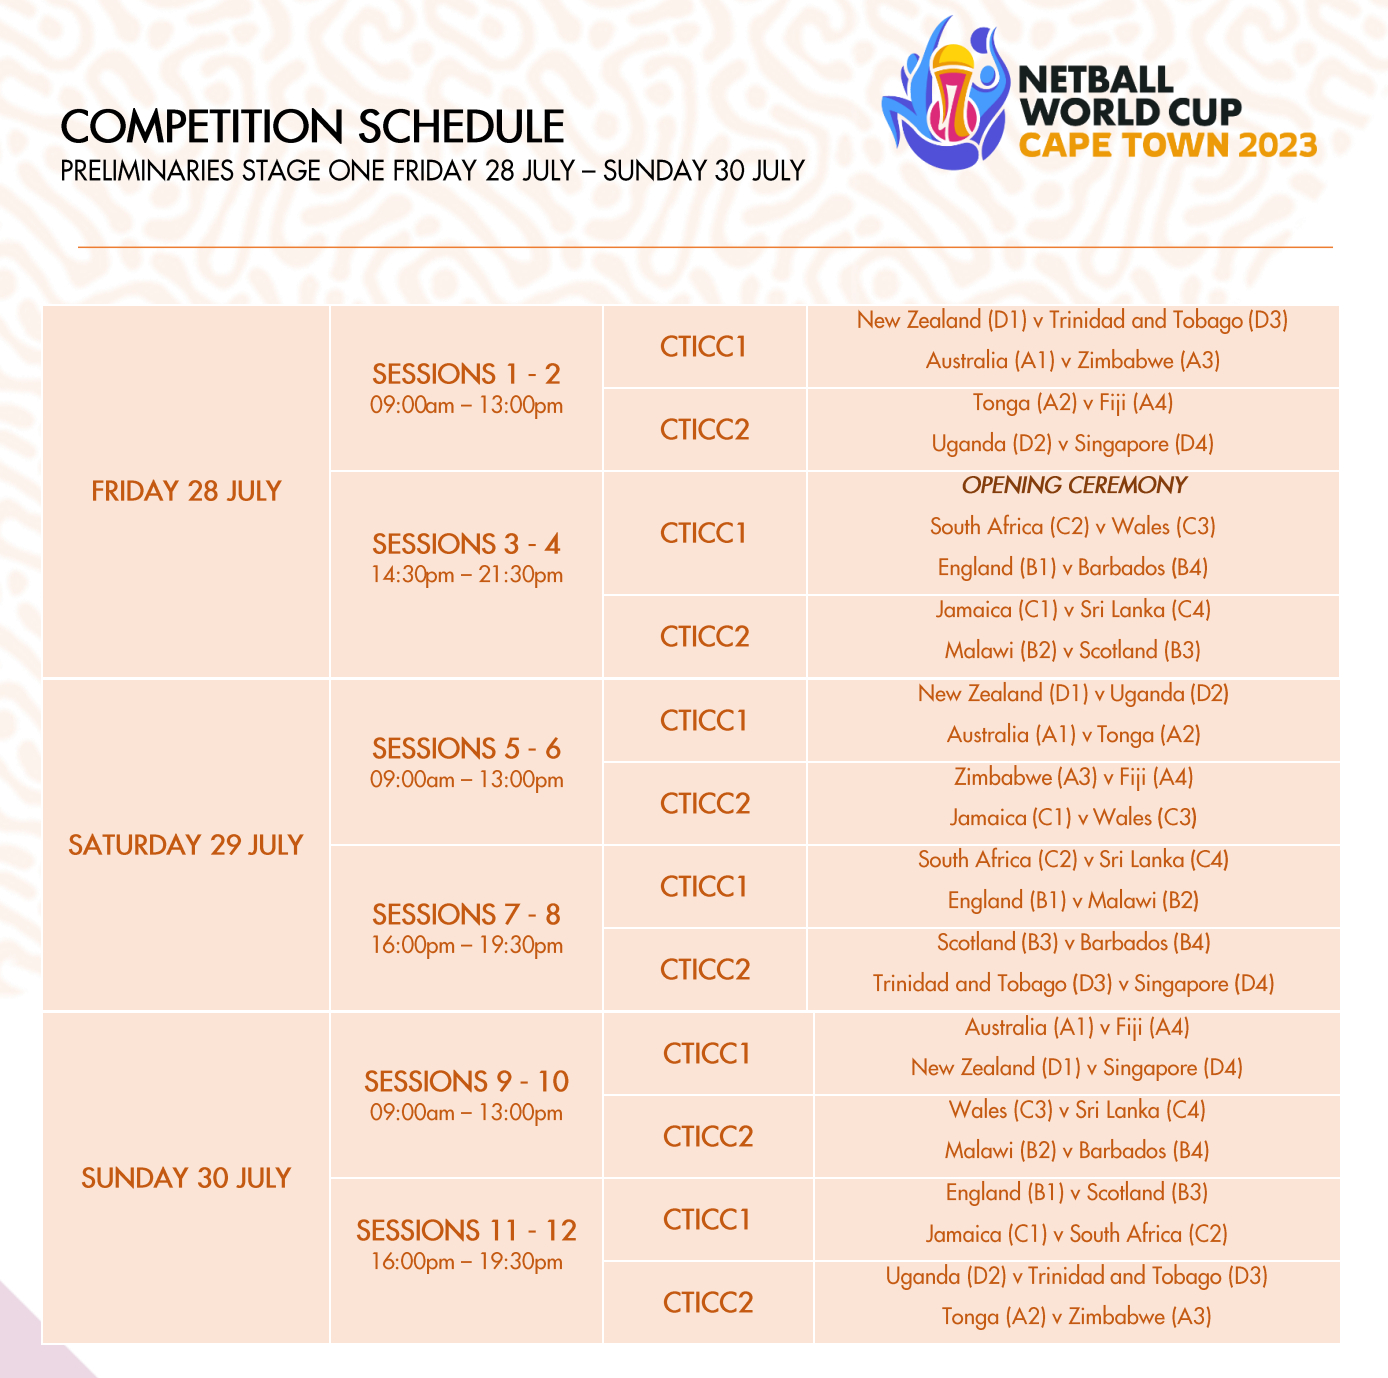 Netball World Cup She Cranes group schedule confirmed